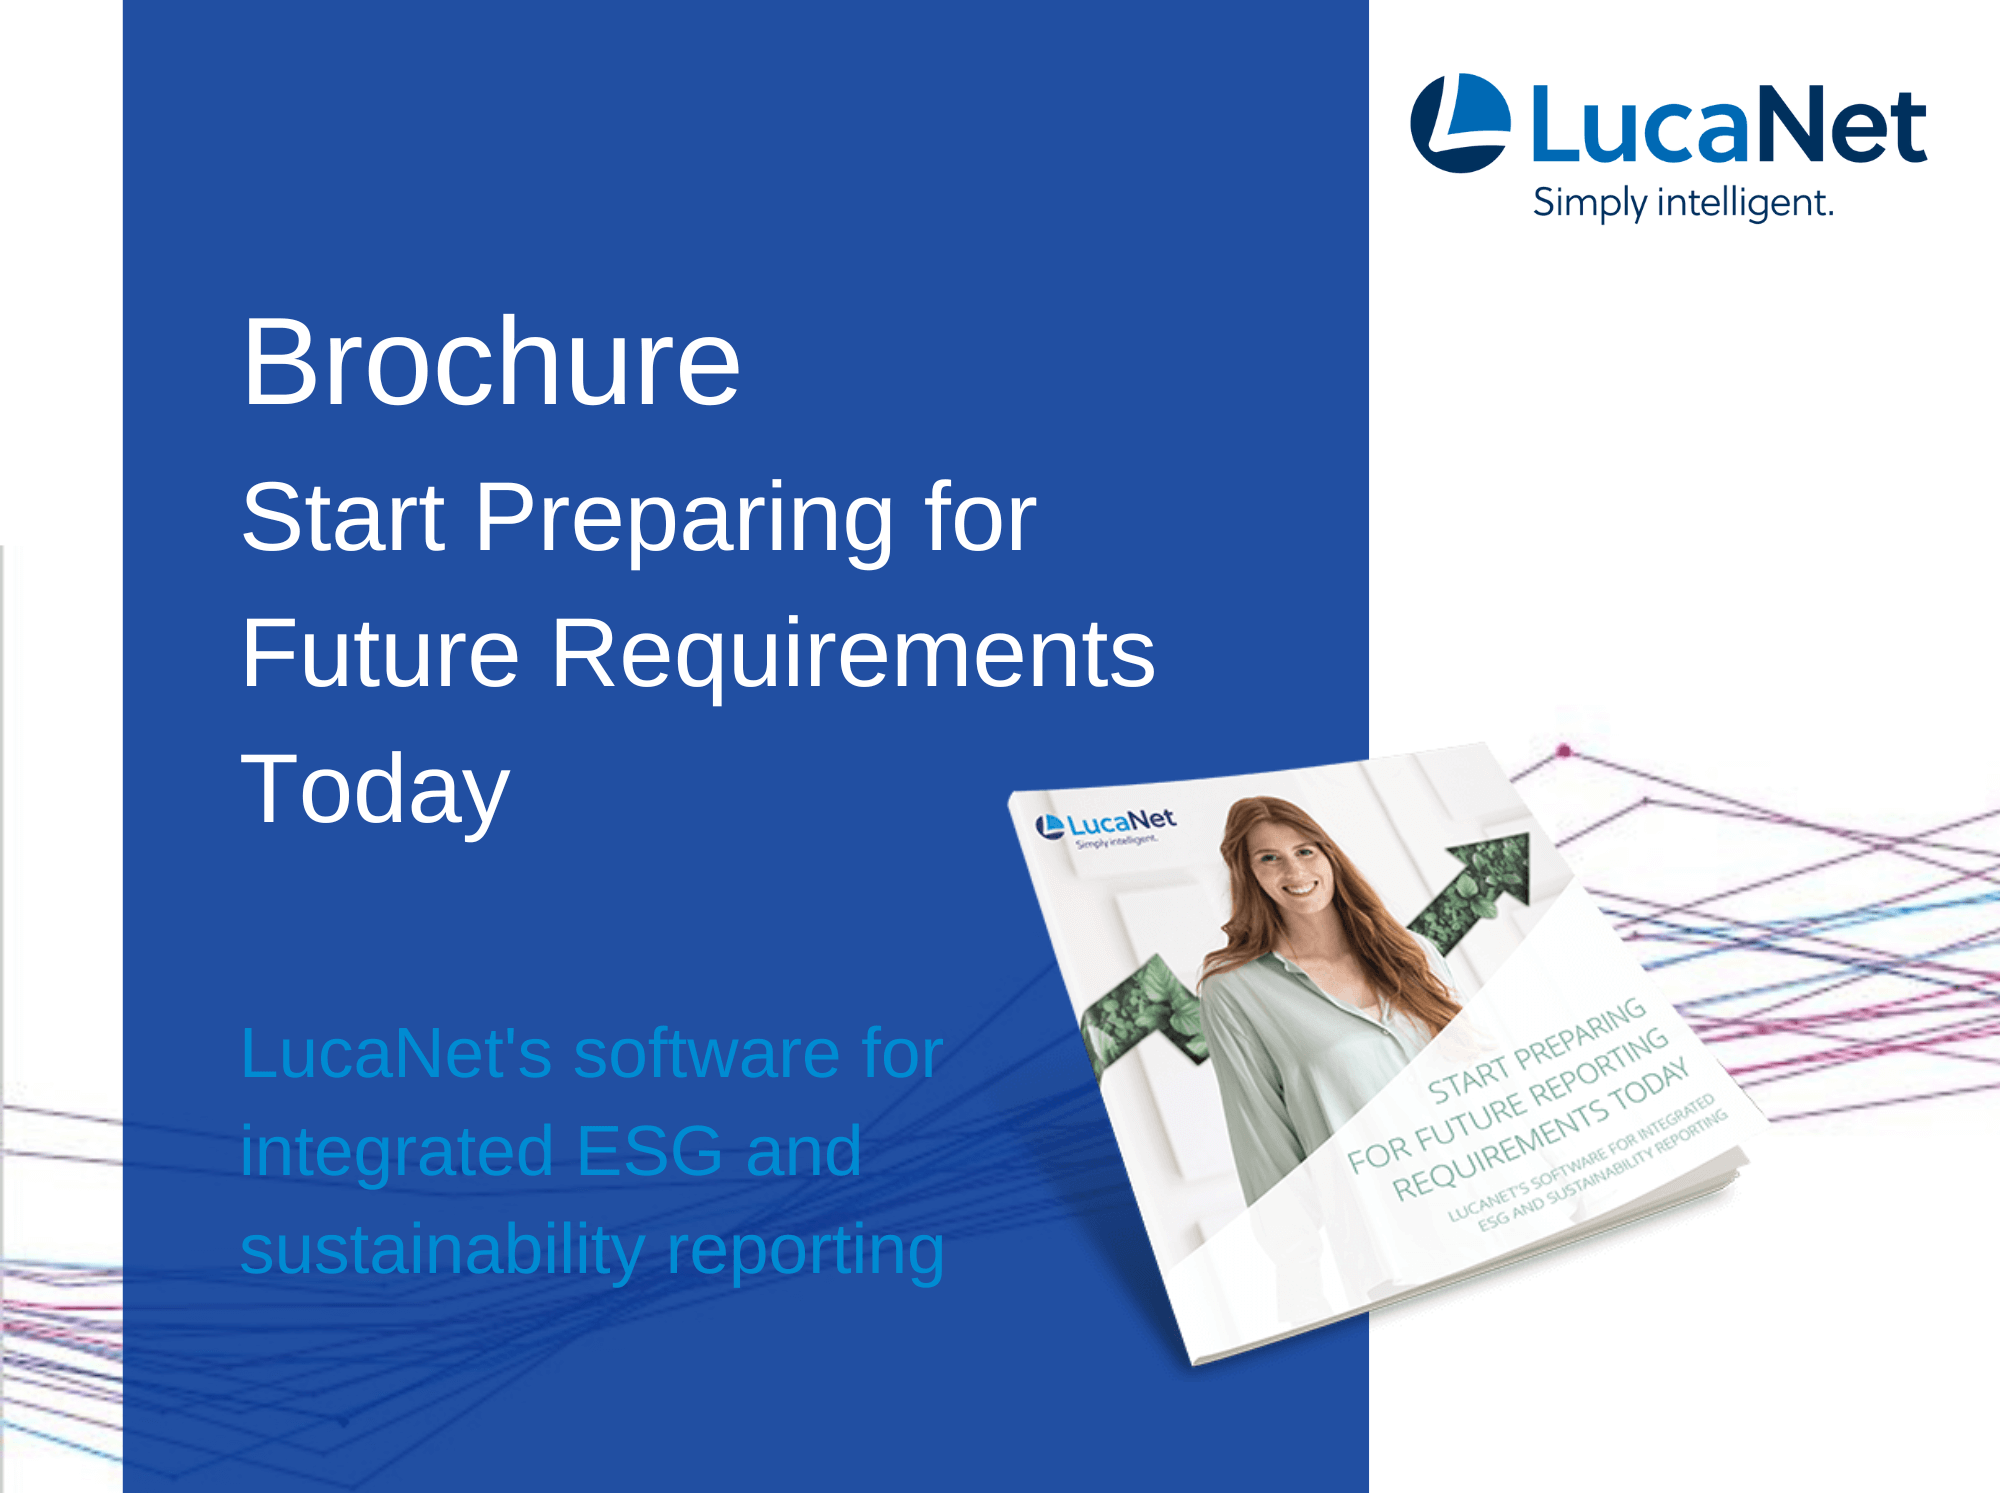 Start Preparing For Future Reporting Requirements Today